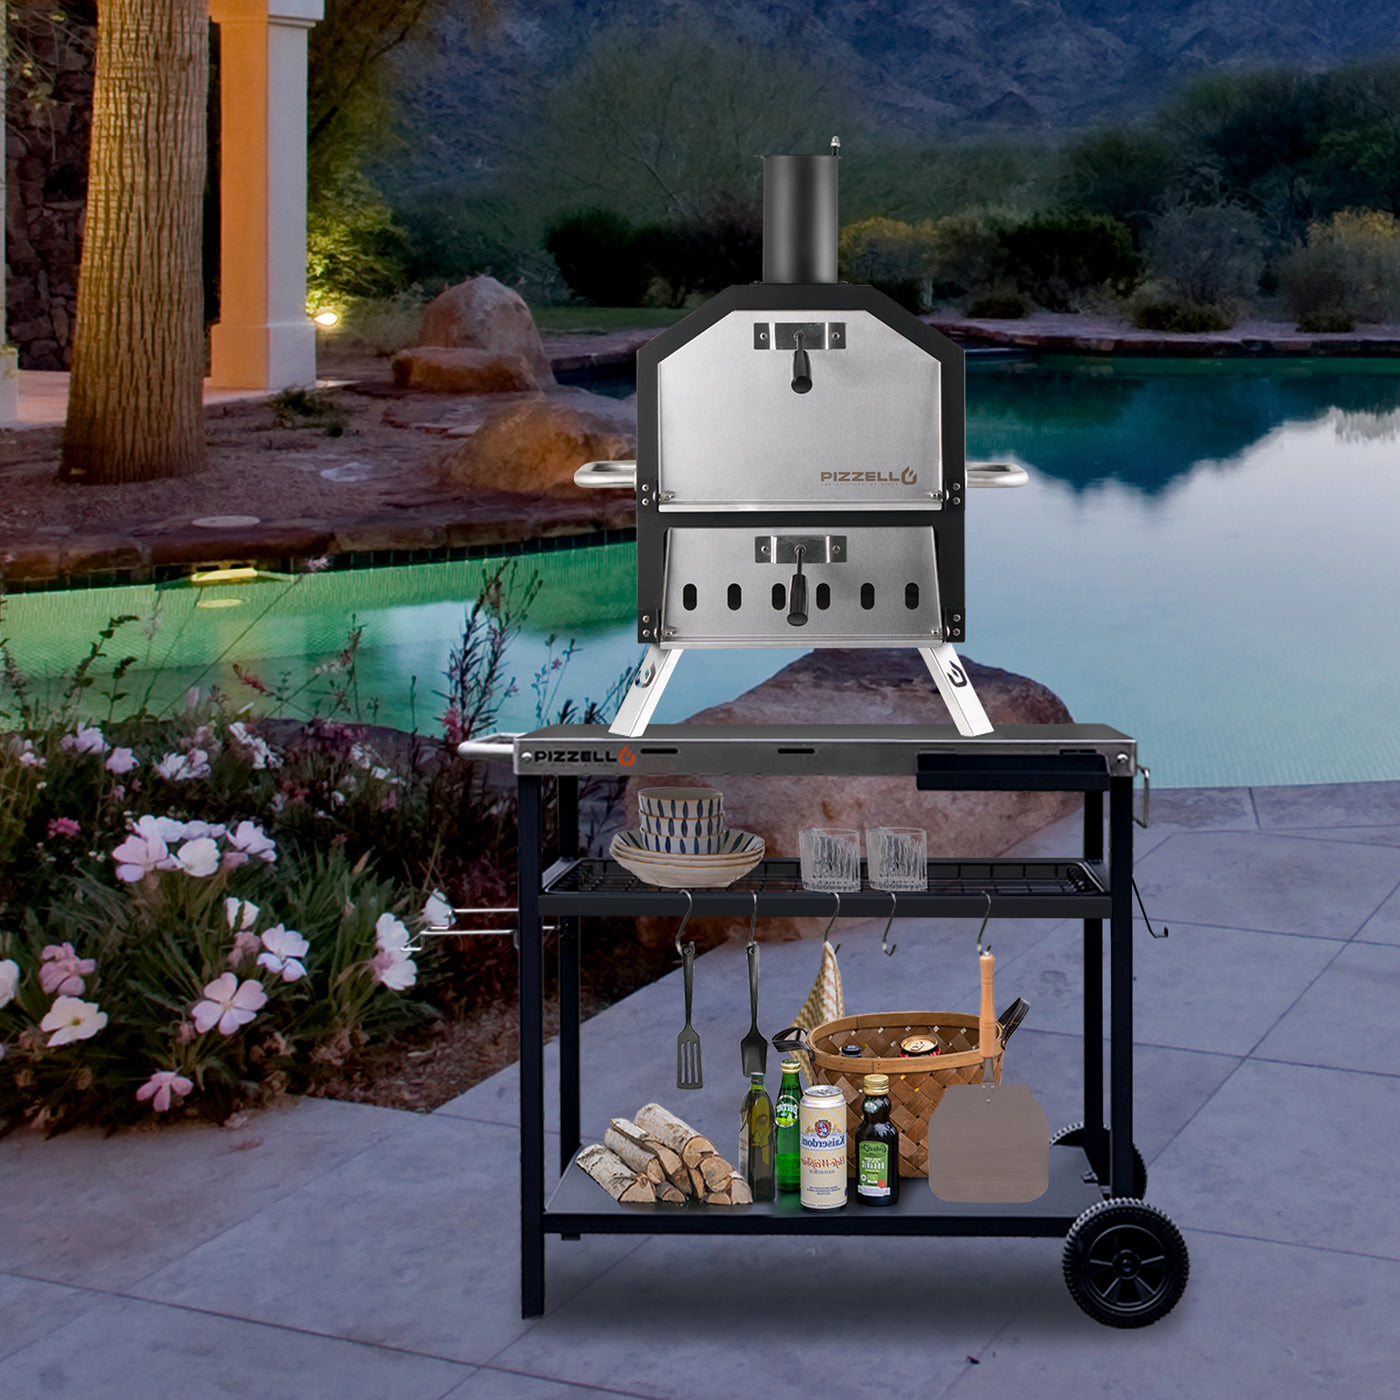 Outdoor Pizzello Grande - Outdoor 2-Layer Pizza Oven on a cart by a poolside, ready for a cooking session with precise temperature control.